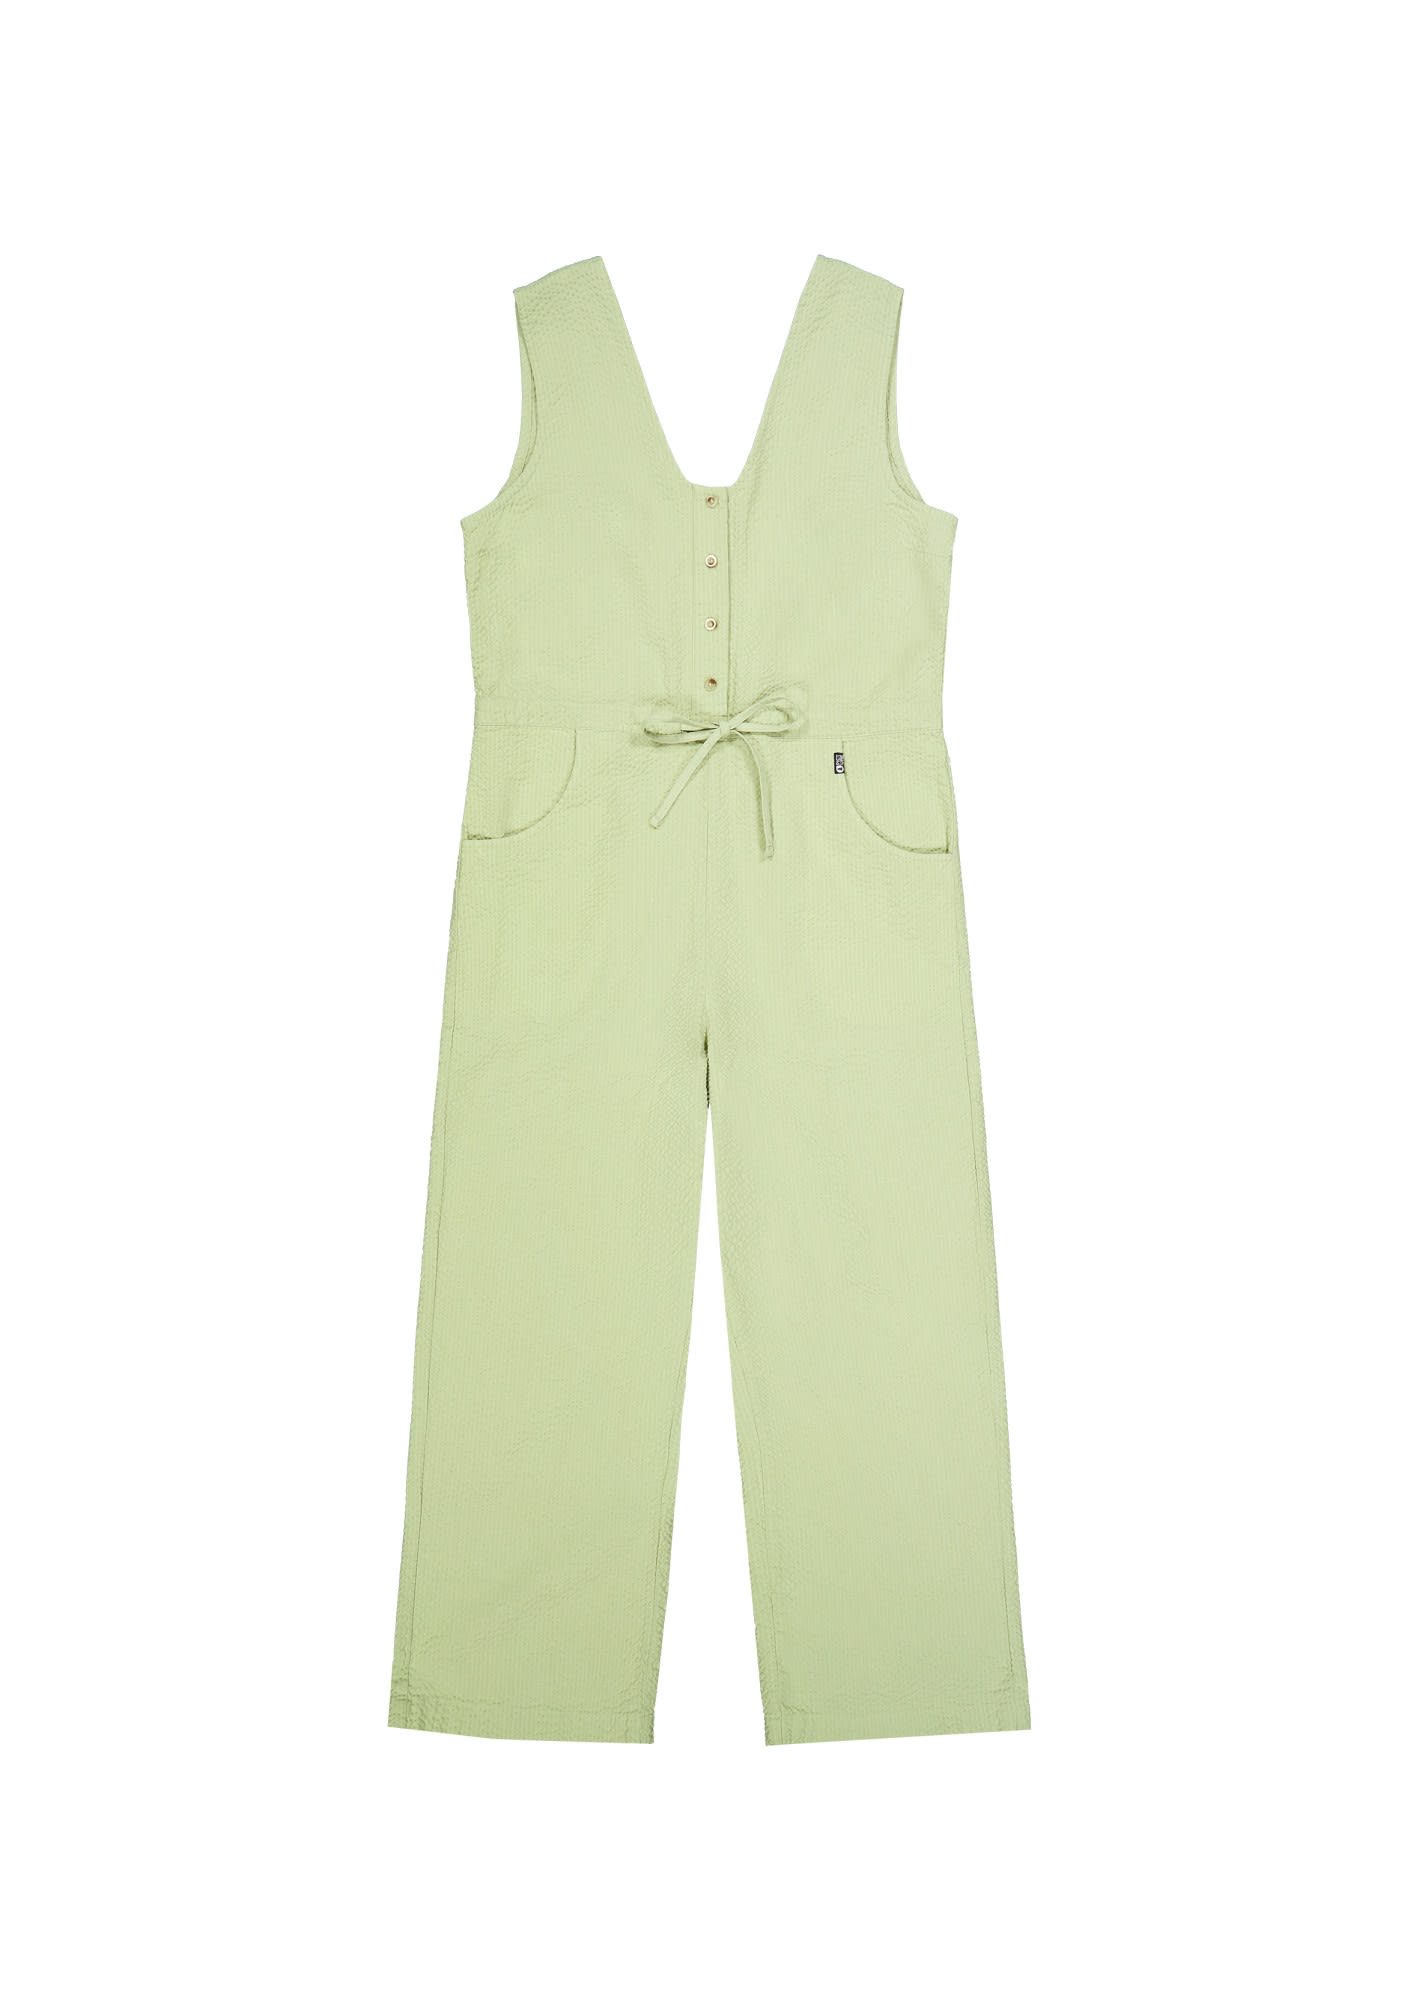 Picture Overall Picture W Trinket Suit Damen Overalls & OnePiece